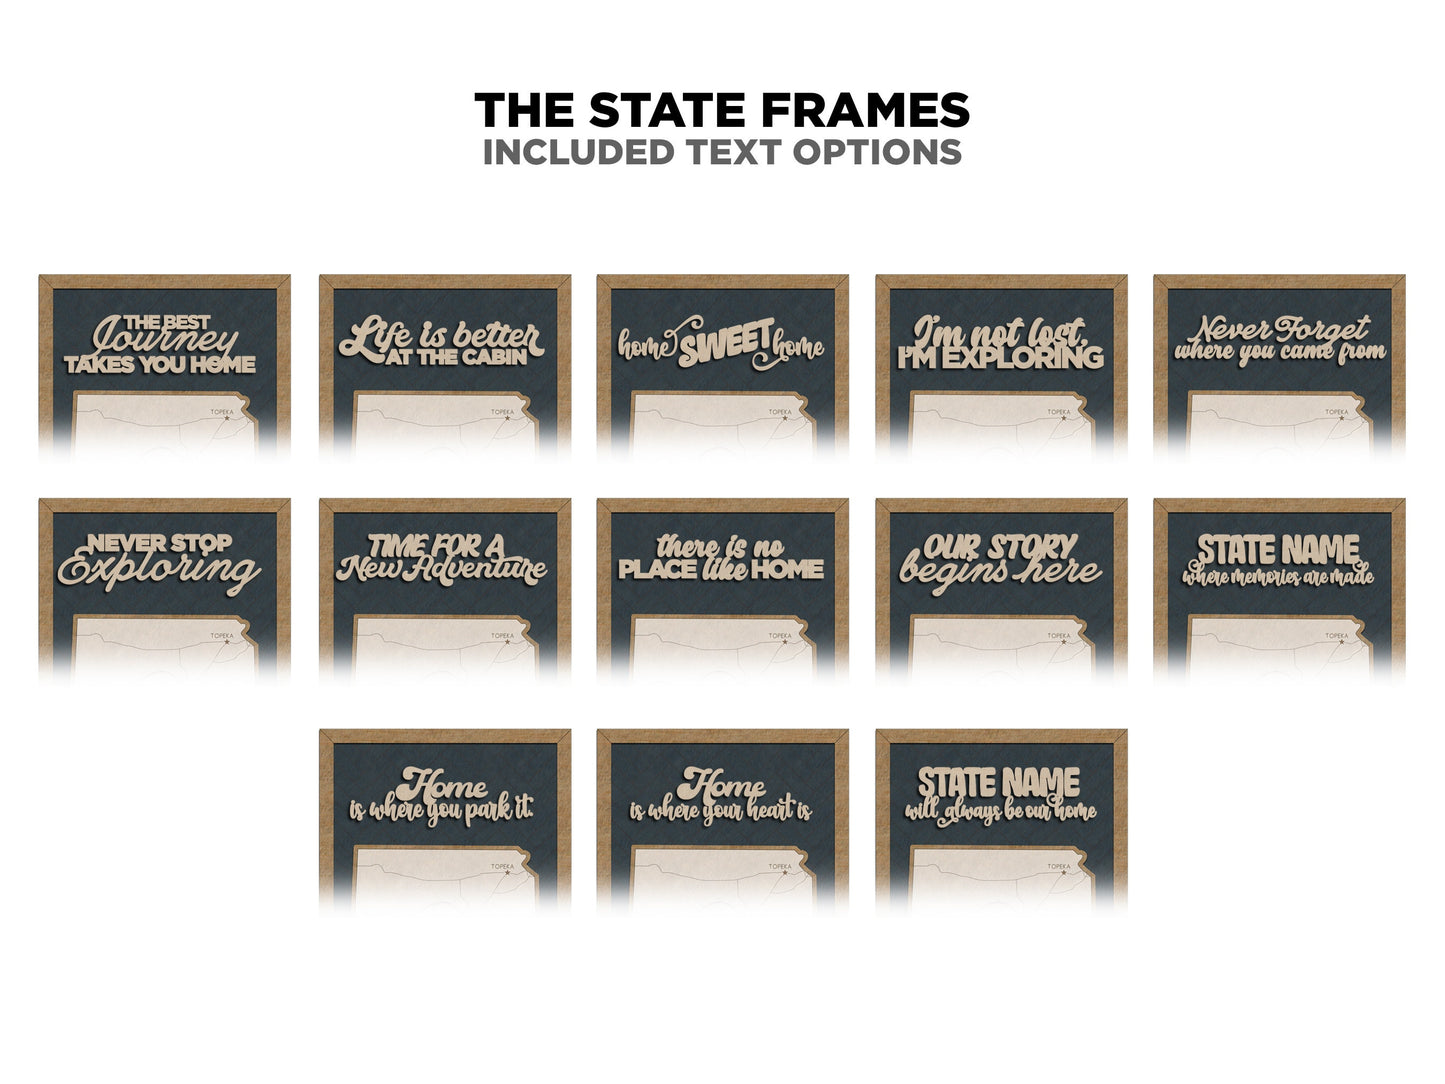 The Oregon State Frame - 13 text options, 12 backgrounds, 25 icons Included - Make over 7,500 designs - Glowforge & Lightburn Tested